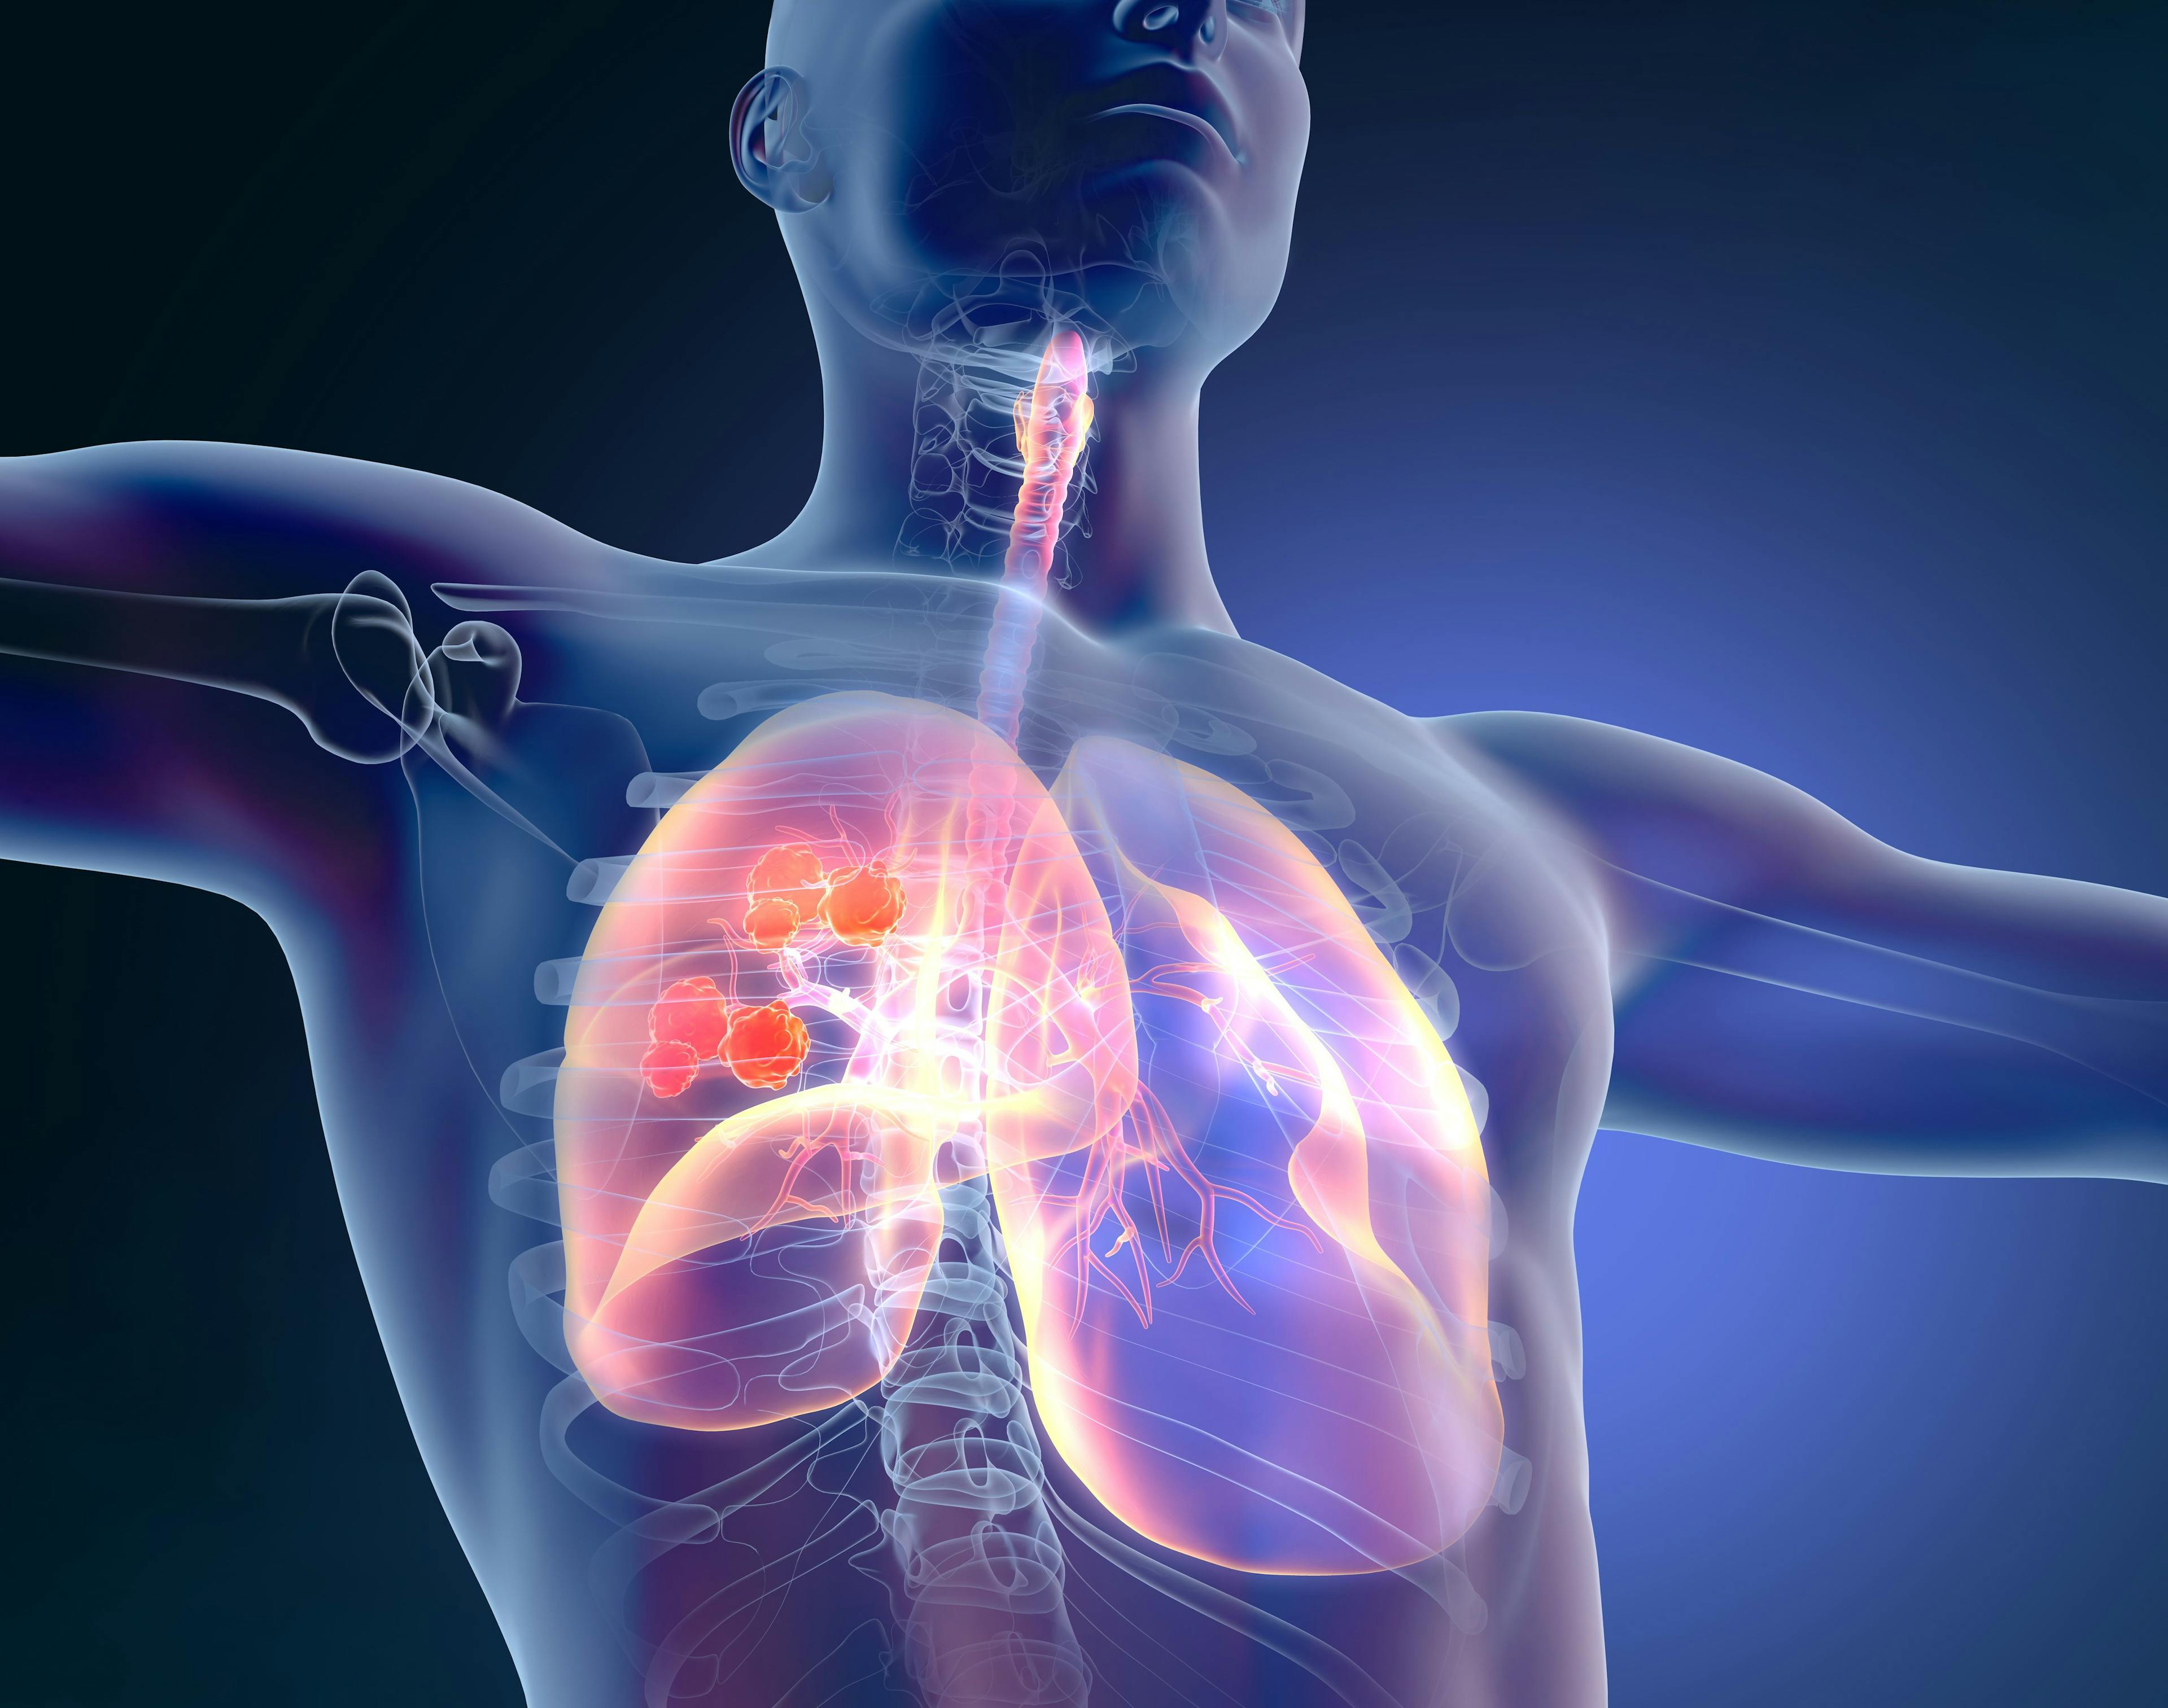 7 Recent News and Updates in Lung Cancer